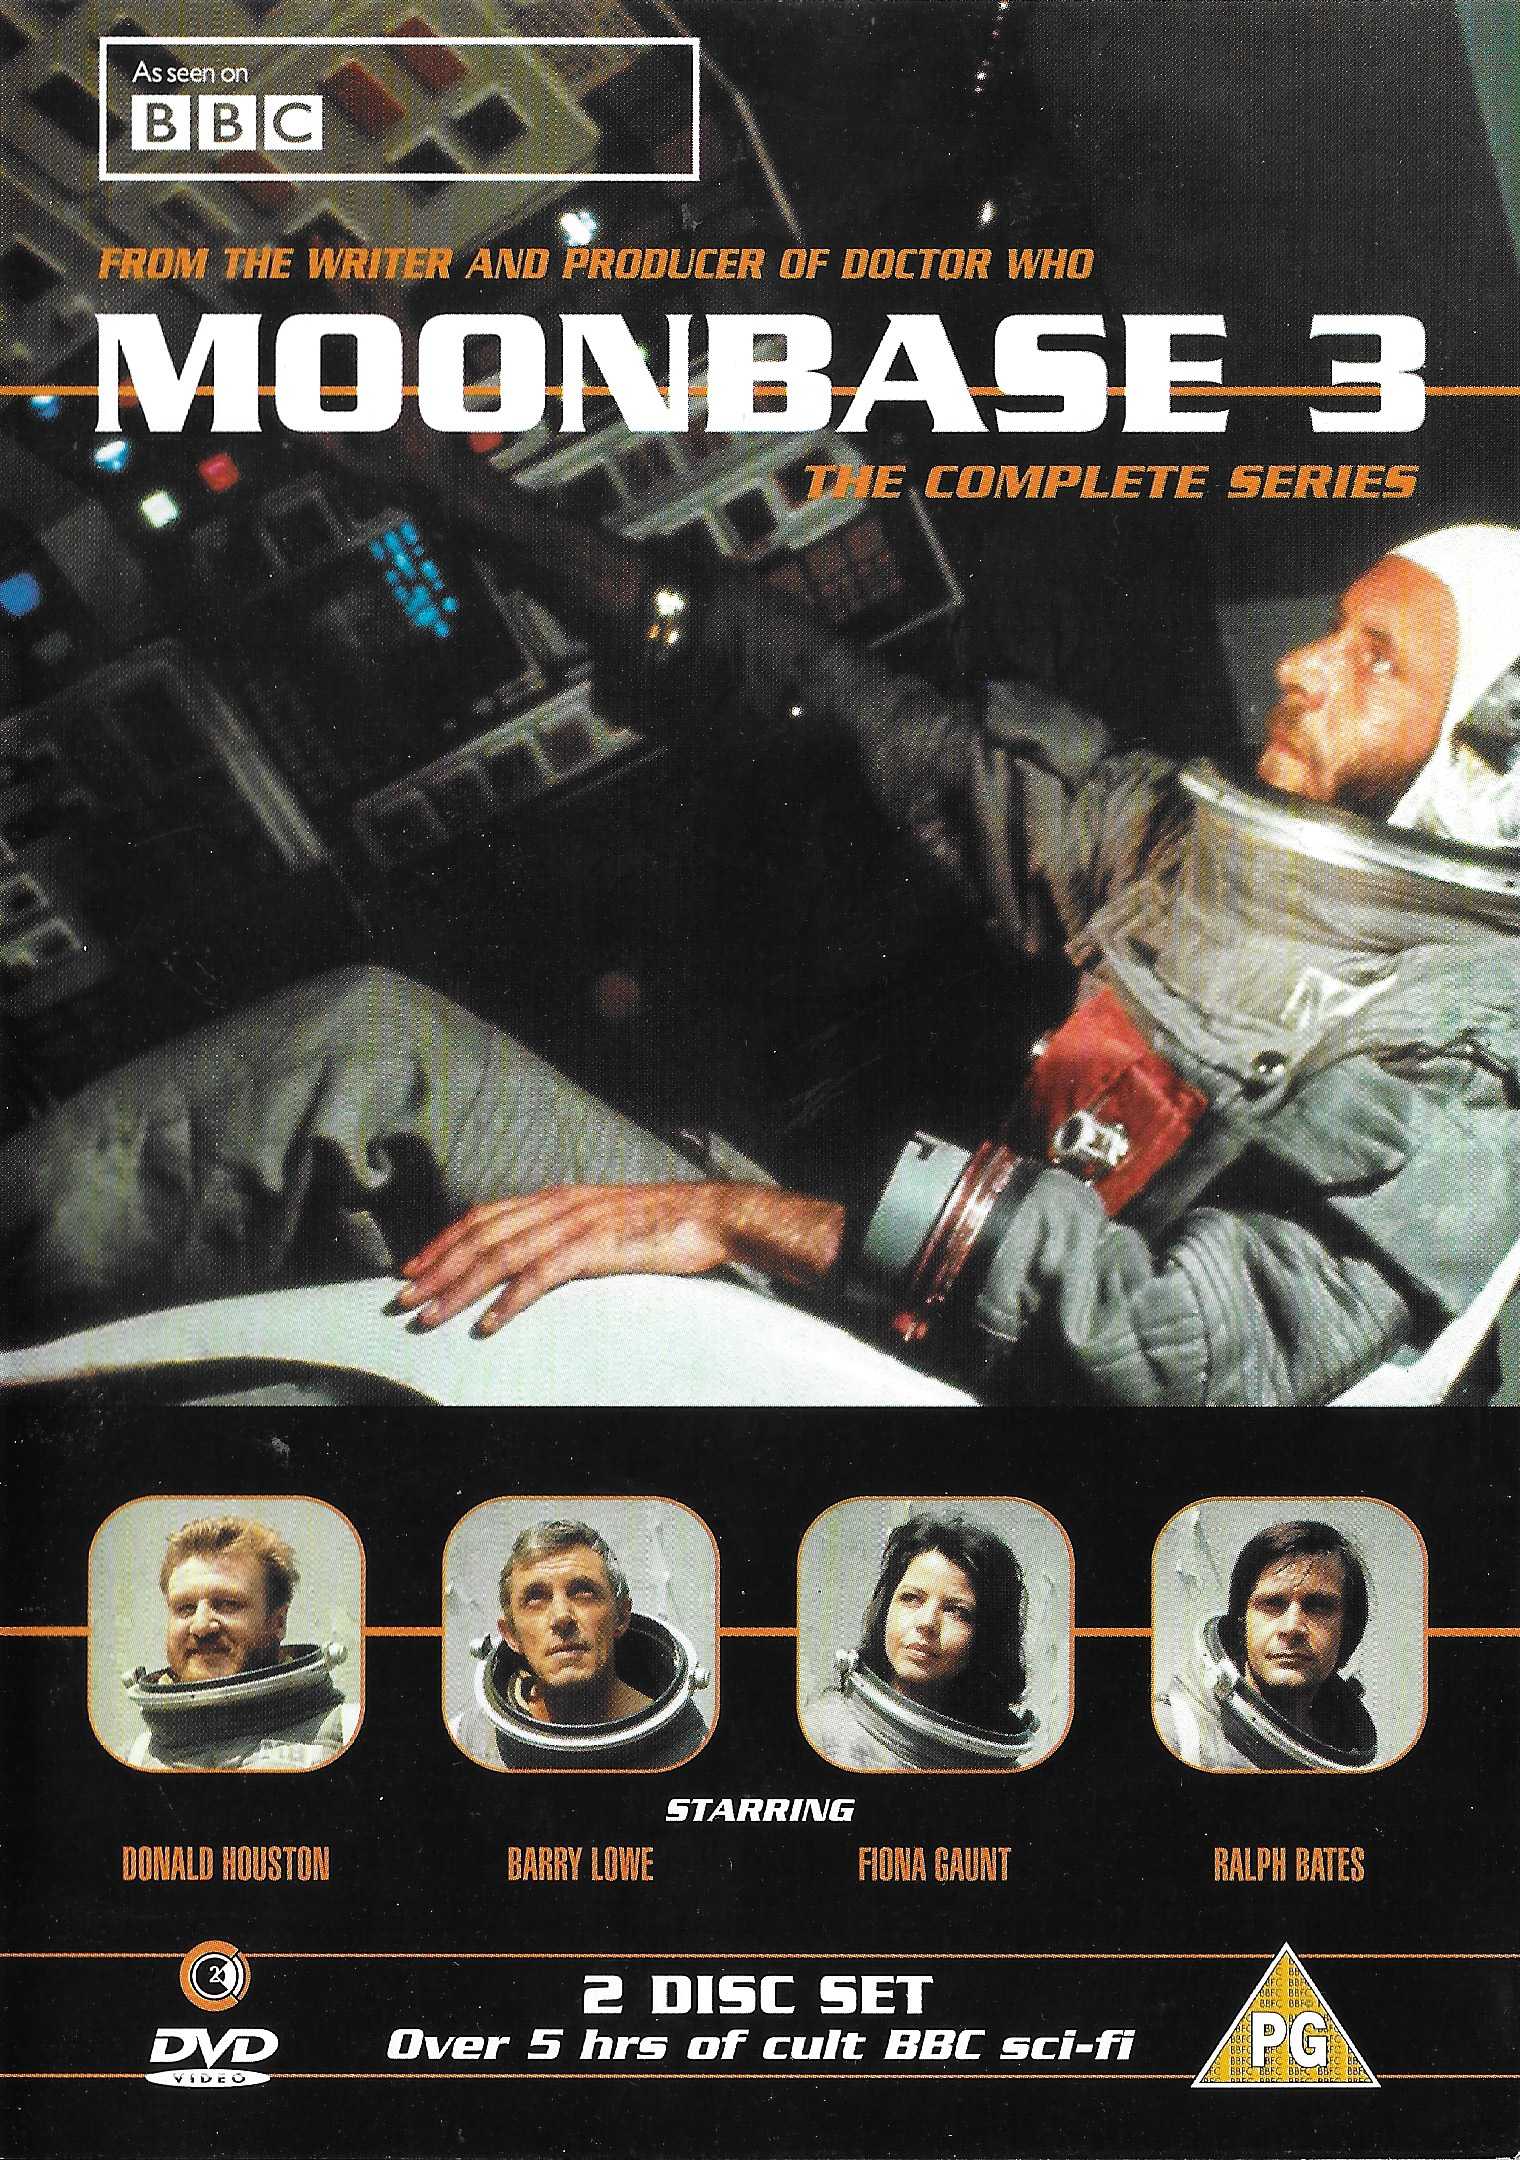 Picture of 2NDVD 3038 Moonbase 3 by artist Terrance Dicks / Barry Letts / John Brason / John Lucarotti / Arden Winch from the BBC records and Tapes library